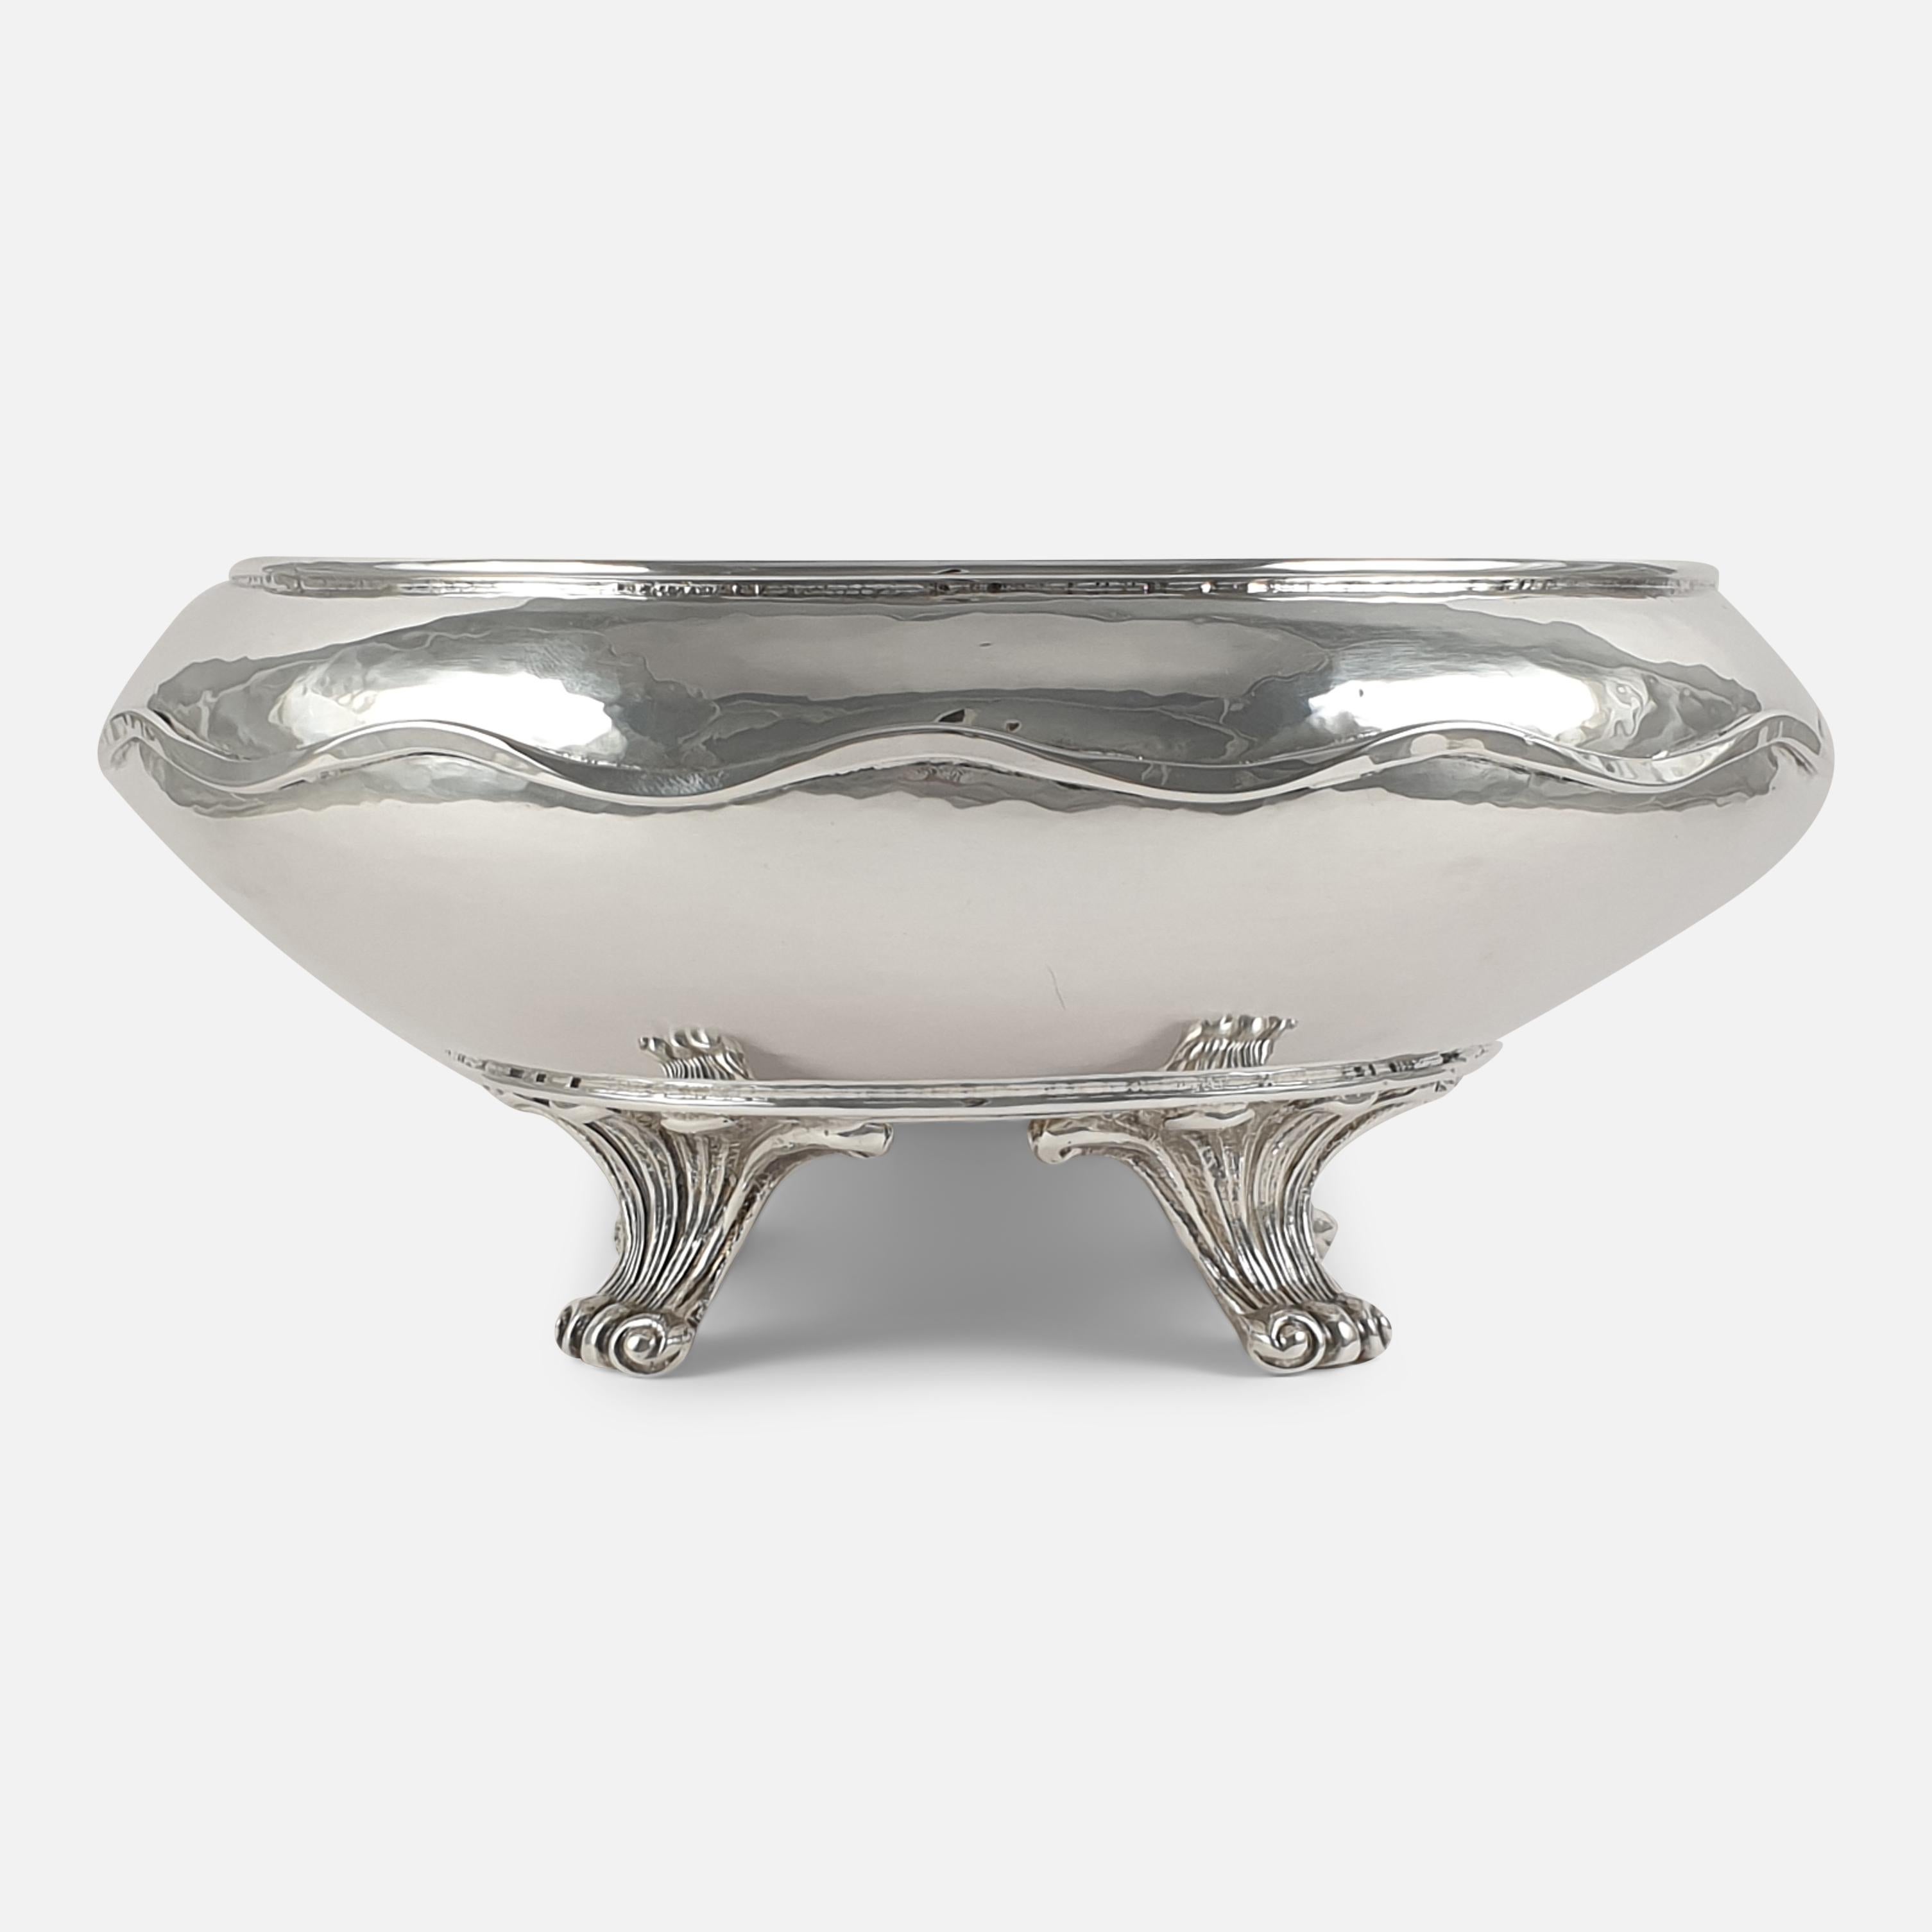 An Arts & Crafts style sterling silver bowl made by Omar Ramsden. The bowl is of circular tapering form, with spot-hammered decoration, and a wavy-edge border, sitting on four fluted scroll feet. 

Assay: - .925 Silver.

Date: - London,